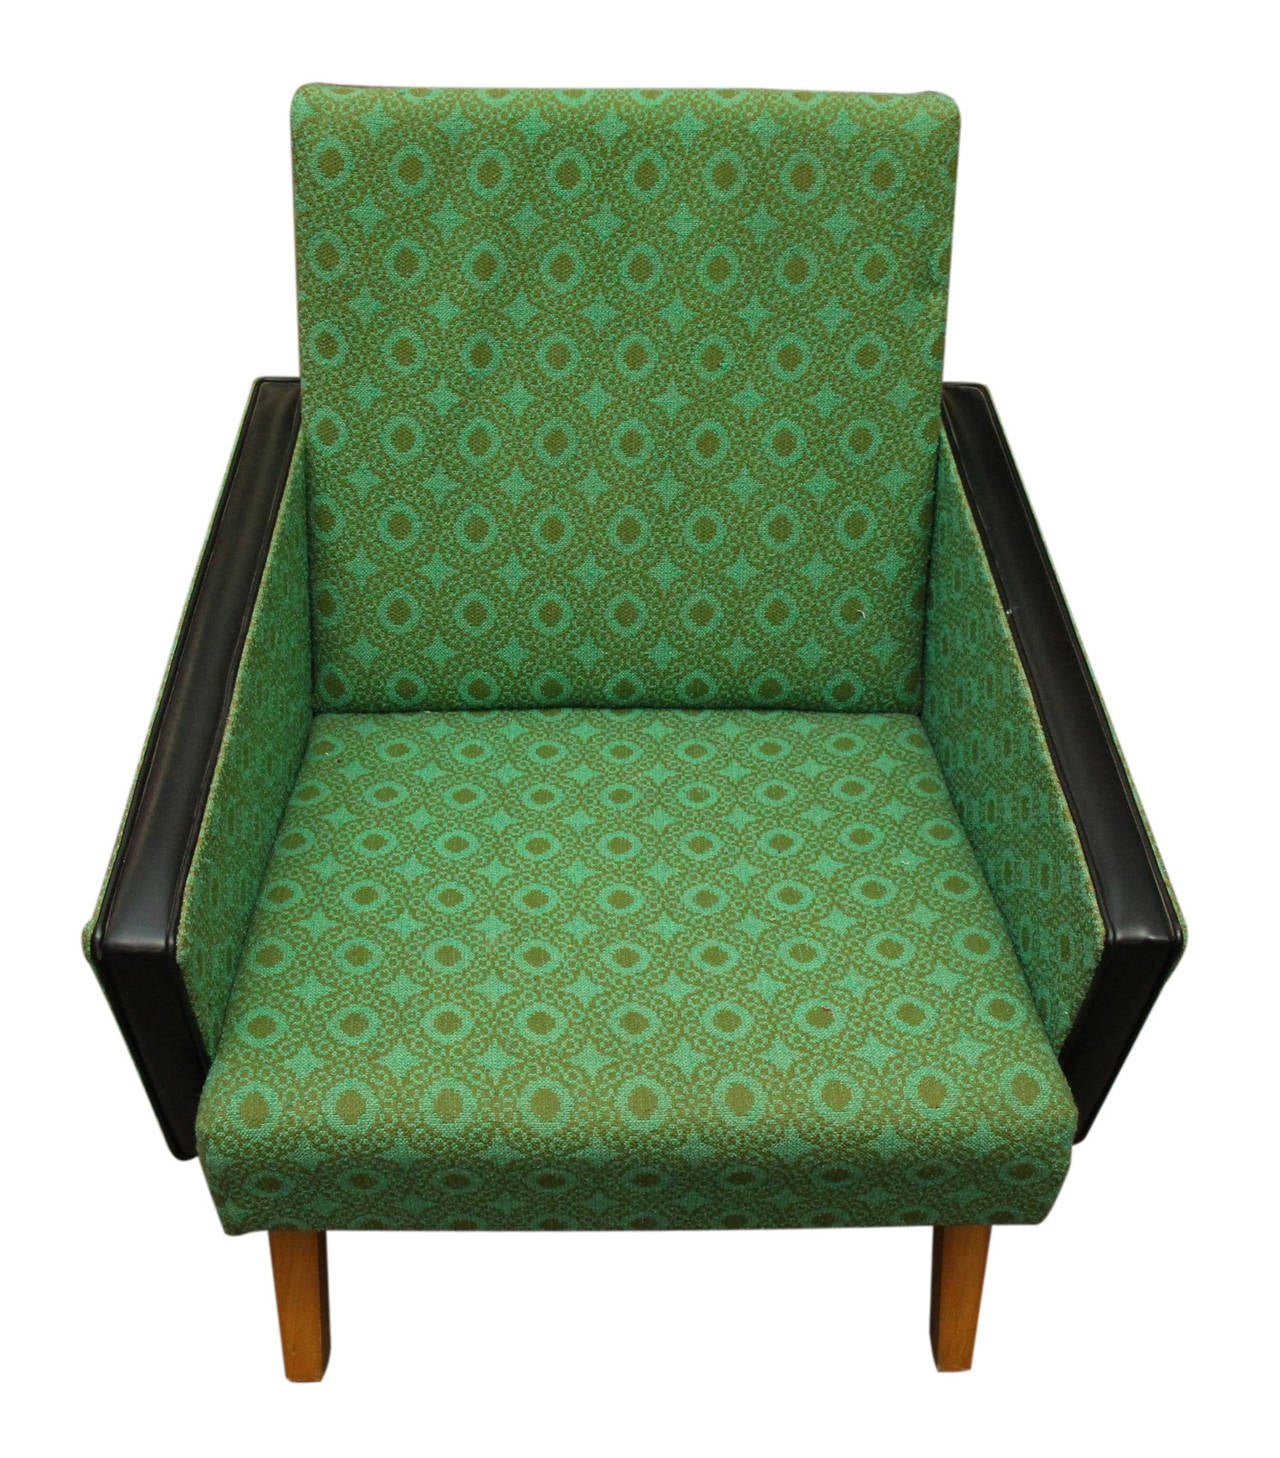 Mid-20th Century 1950s Pair of Mid-Century Modern Green and Black Angular Armchairs from France